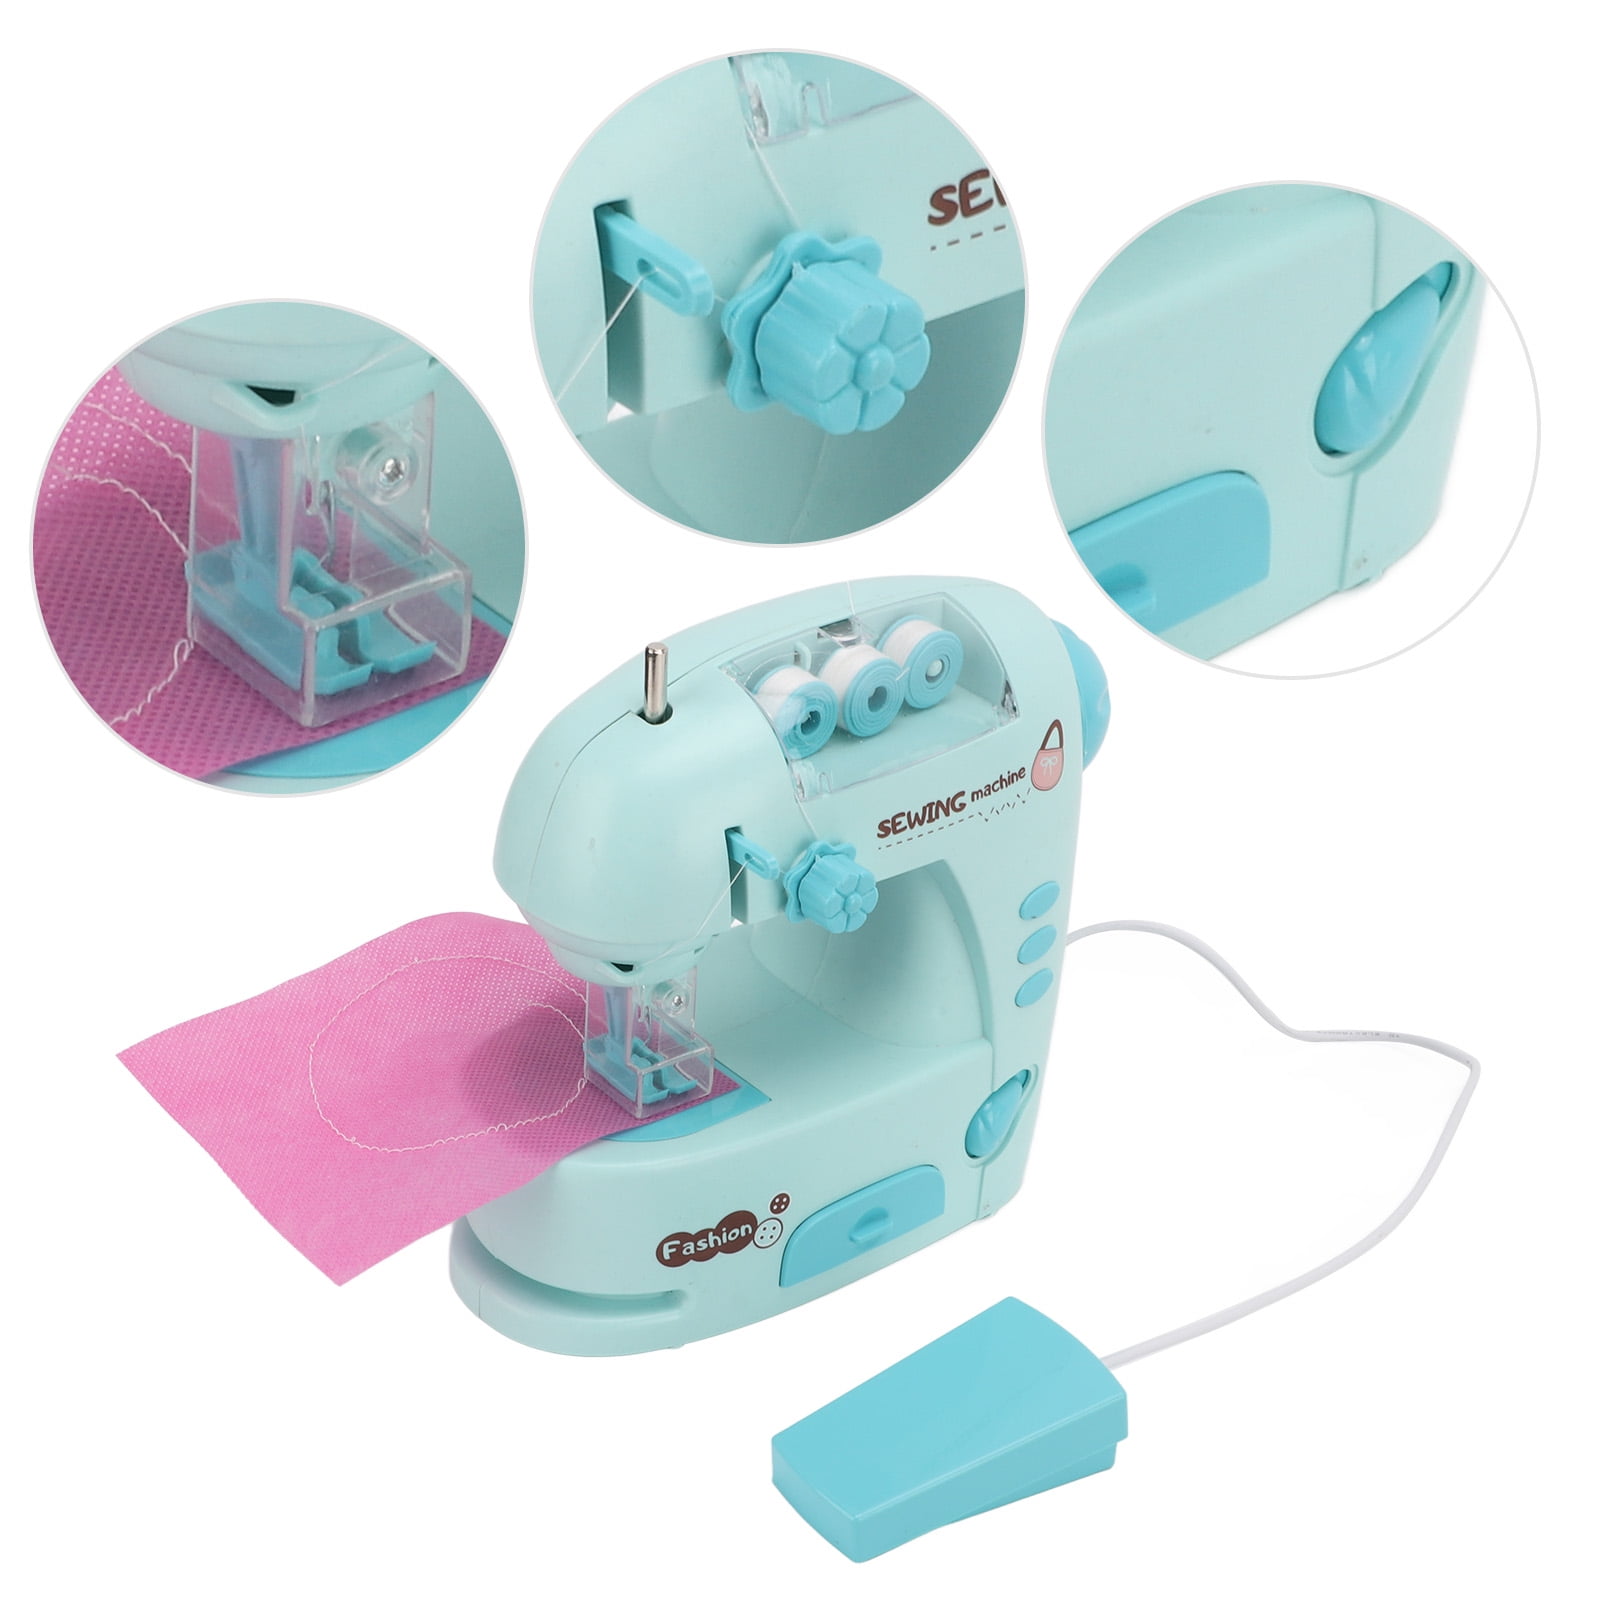 863 Mini Kid's Sewing Machine Educational Interesting Toy Portable Electric  DIY Sewing Machine Small Multi-function Mending Machine for Children -  Green Wholesale